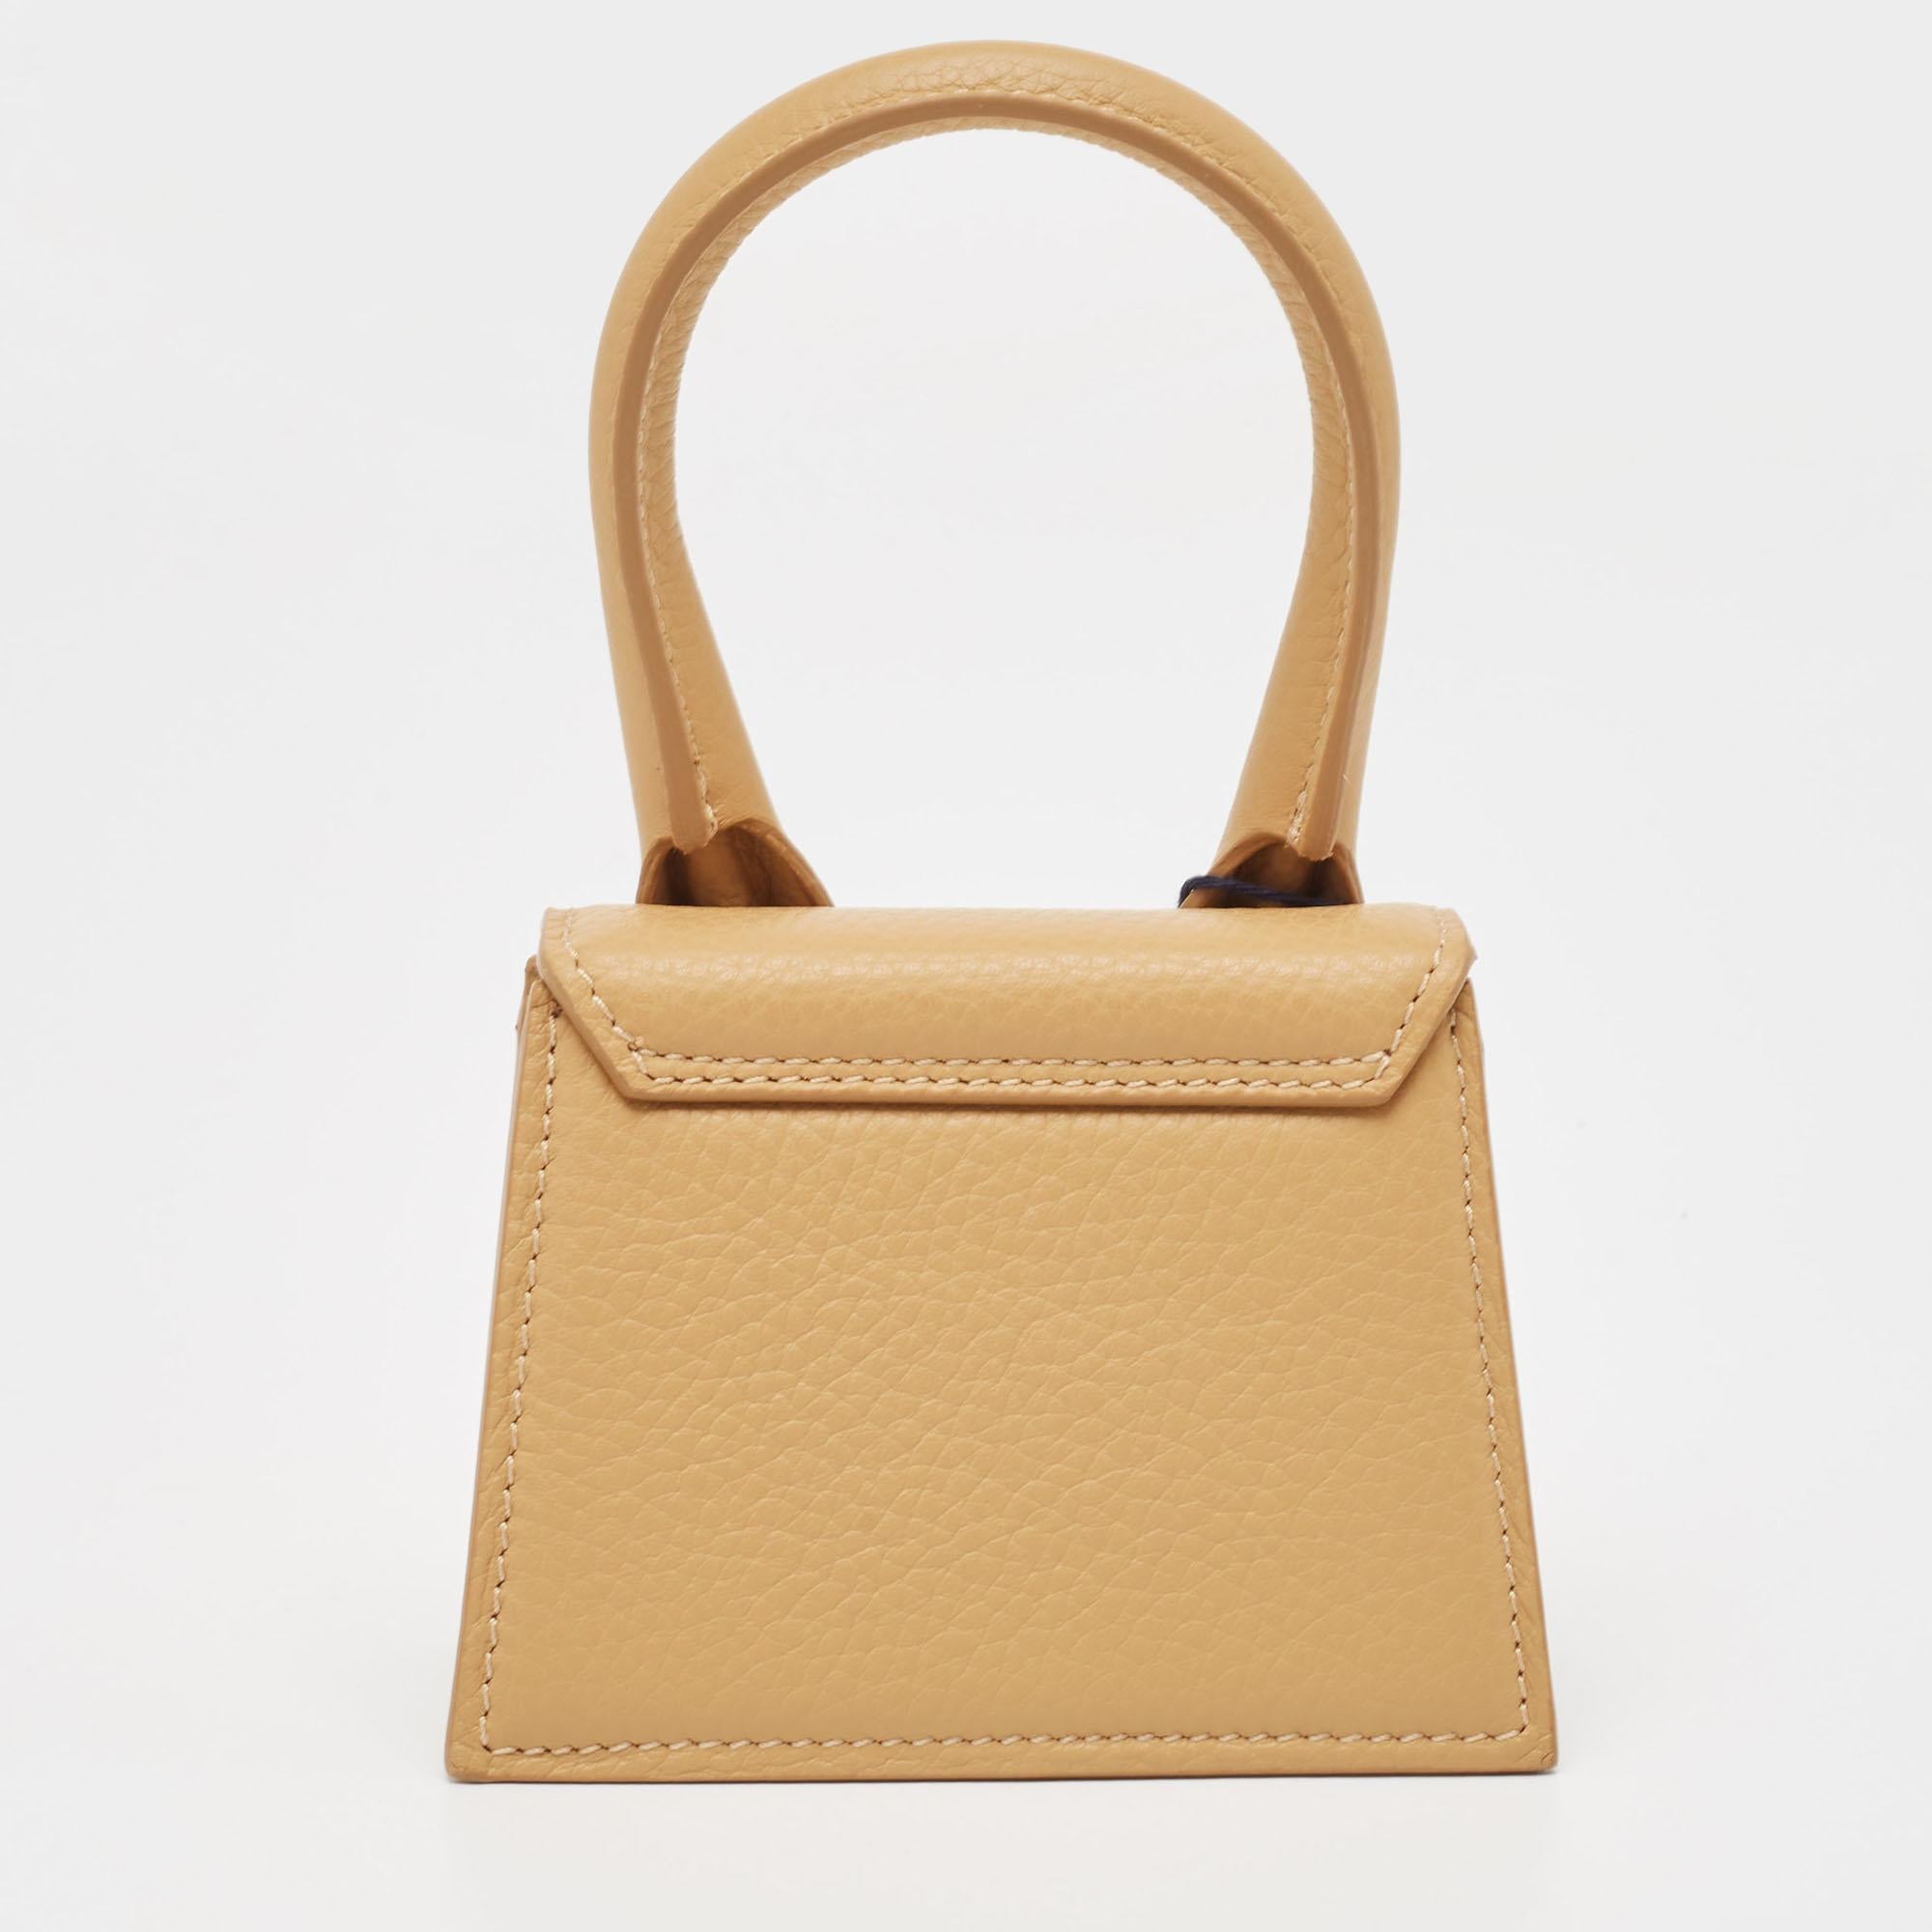 Chances are that you have already noticed this bag on your social media feeds carried by influencers and celebrities. A cult-favorite piece, this Jacquemus Le Chiquito bag comes in a structured silhouette and has a rolled handle. The creation comes